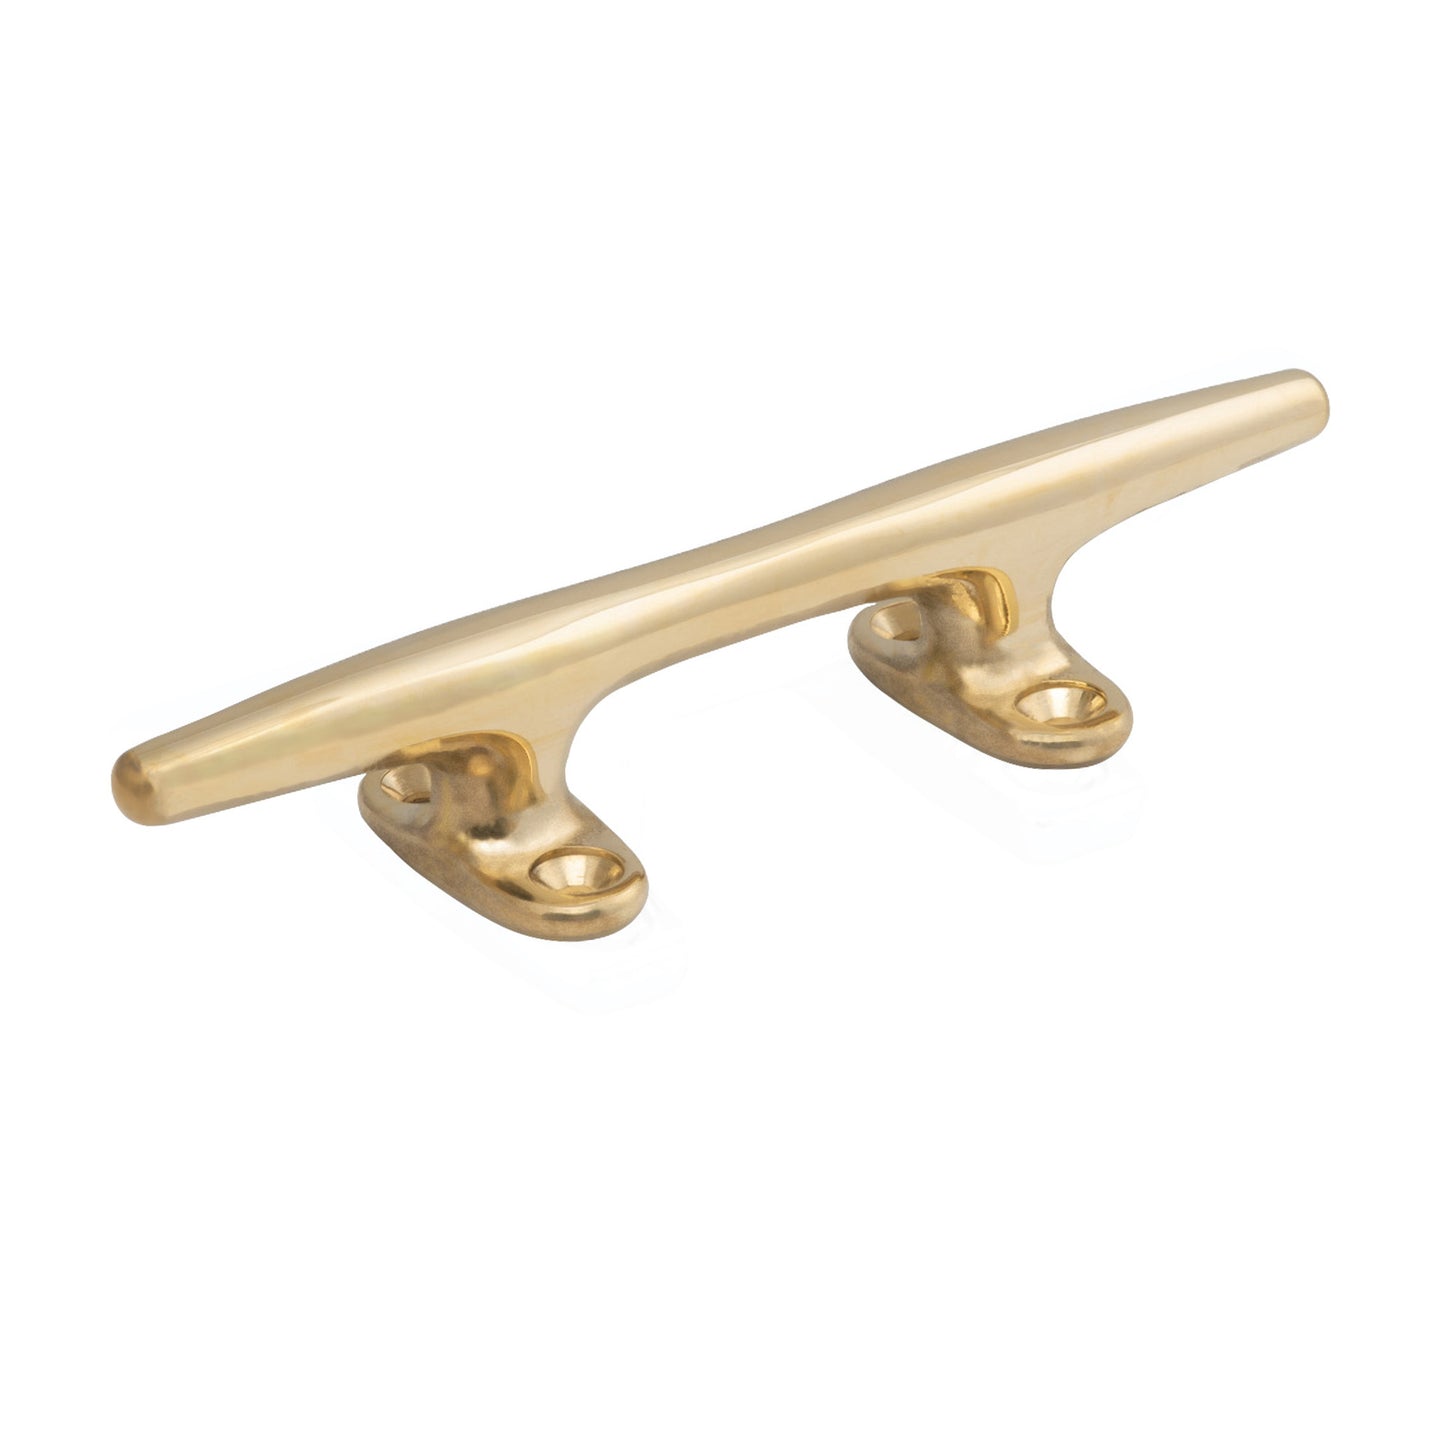 5-1/2" Polished Brass Hollow Base Cleat